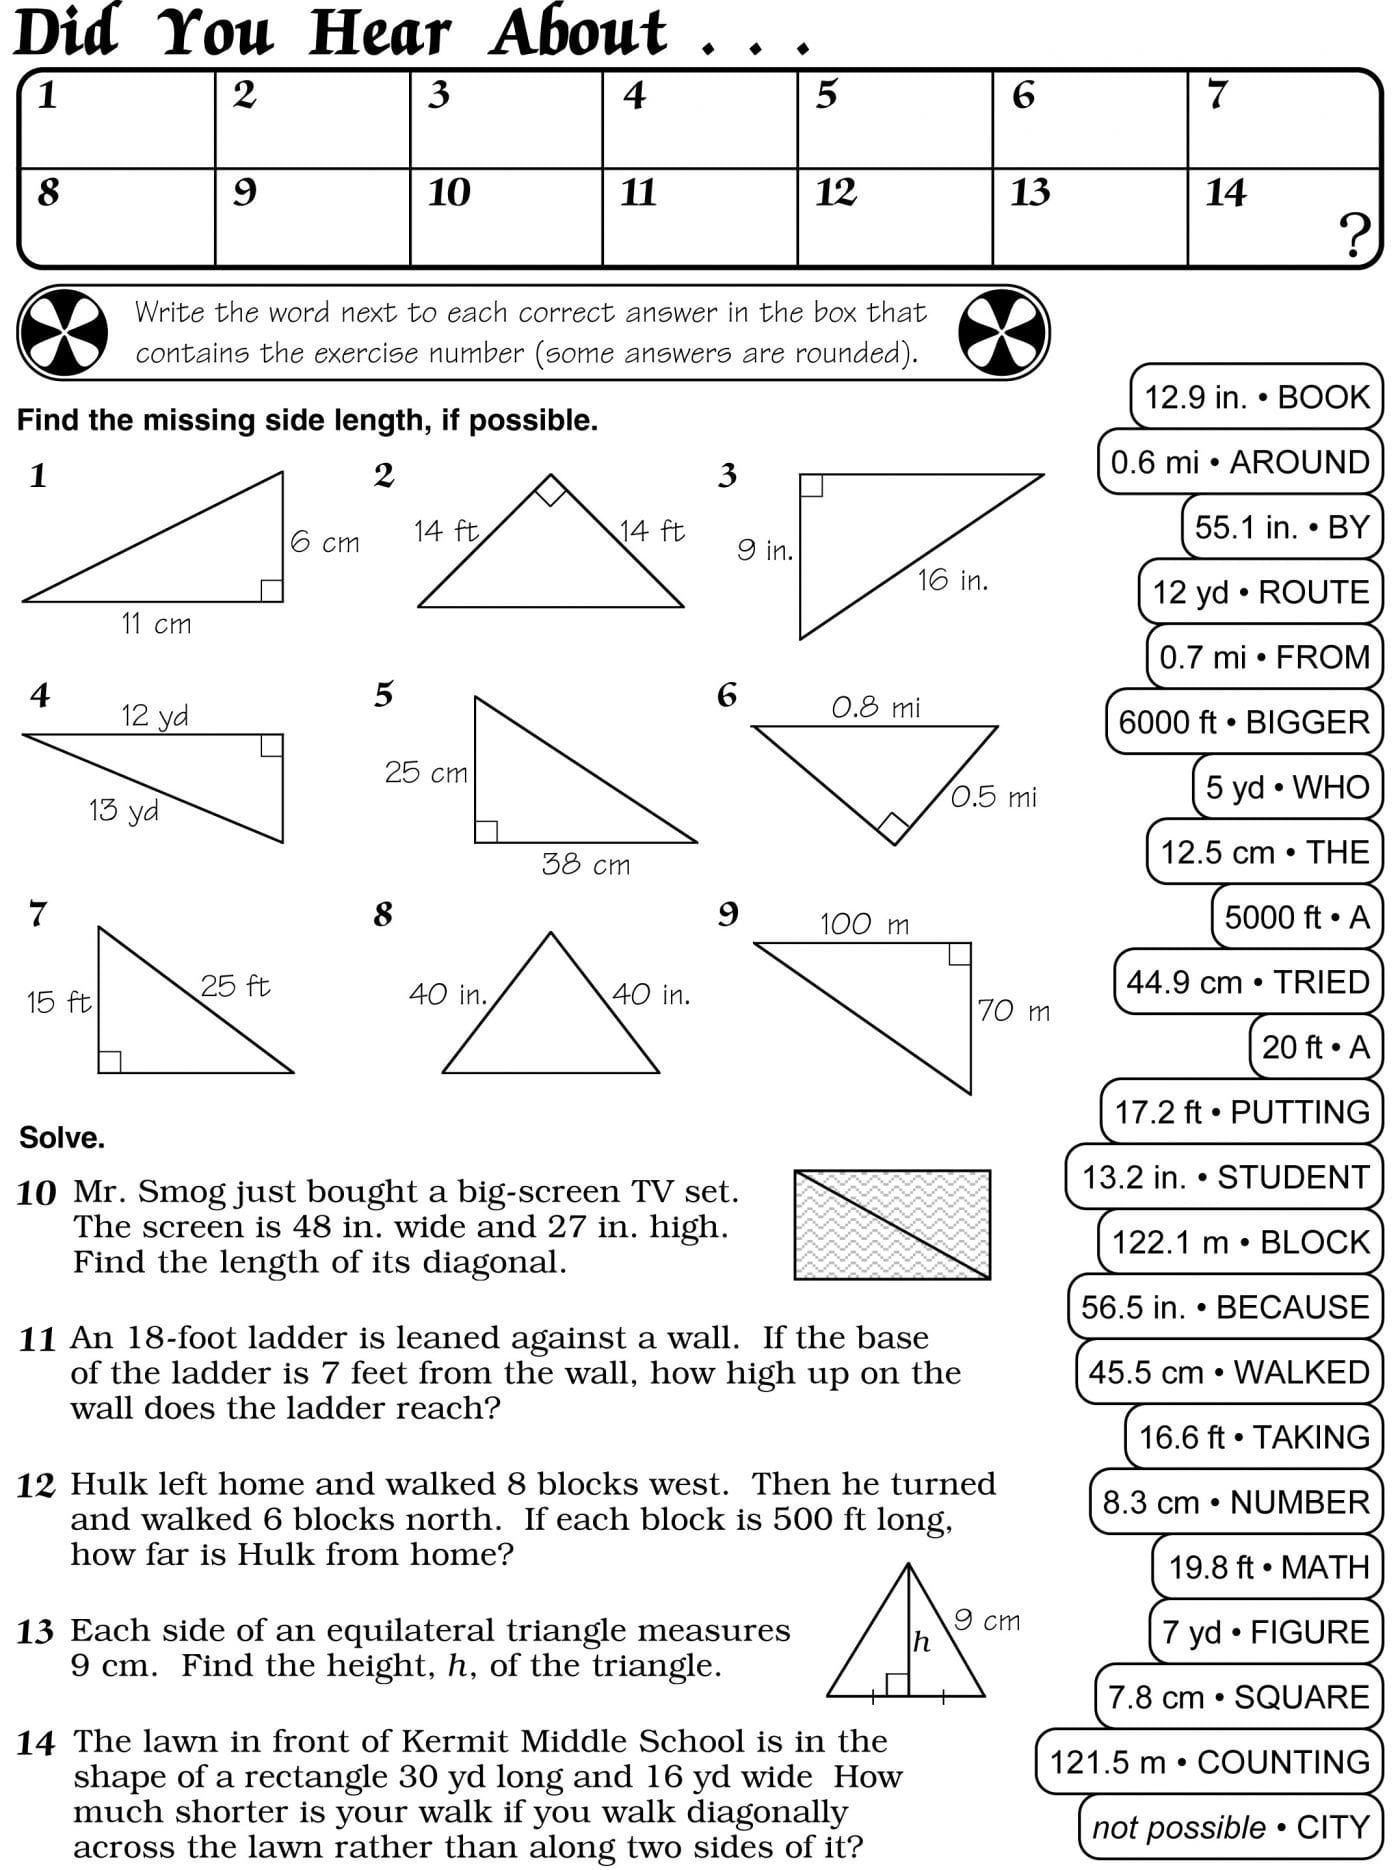 Ideas Of Worksheet Answers To Did You Hear About Math Worksheet Hate Together With Did You Hear About Algebra Worksheet Answers